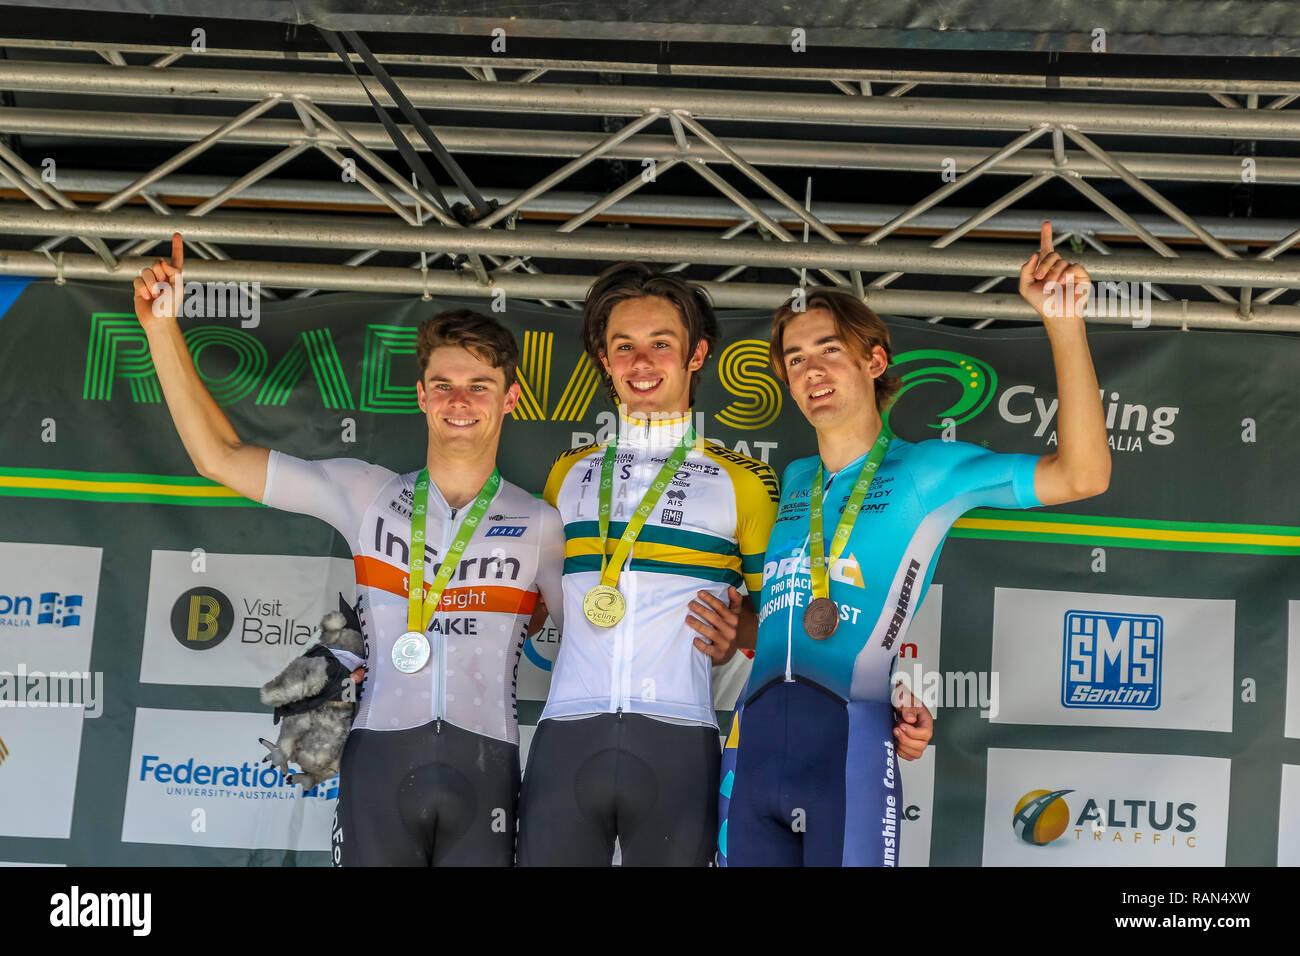 Ballarat, Victoria, Australia. 5th January, 2019. Poduim for 2019 Australian Road National Championships Under 19 Men Road Race - Podium -Winner -#10 Patrick Eddy - 2nd Place #11 Samual Eddy - #3rd Place #77 Alastair Mackellar.The race was over 104kms with nine  11.6 km laps of the course.Eddy won the race with a time of 2hr48.28 with a gap of 1.34 back to second place Brother Samual Eddy and further 1.34 to third Place getter Alastair Mackellar. Credit: brett keating/Alamy Live News Stock Photo